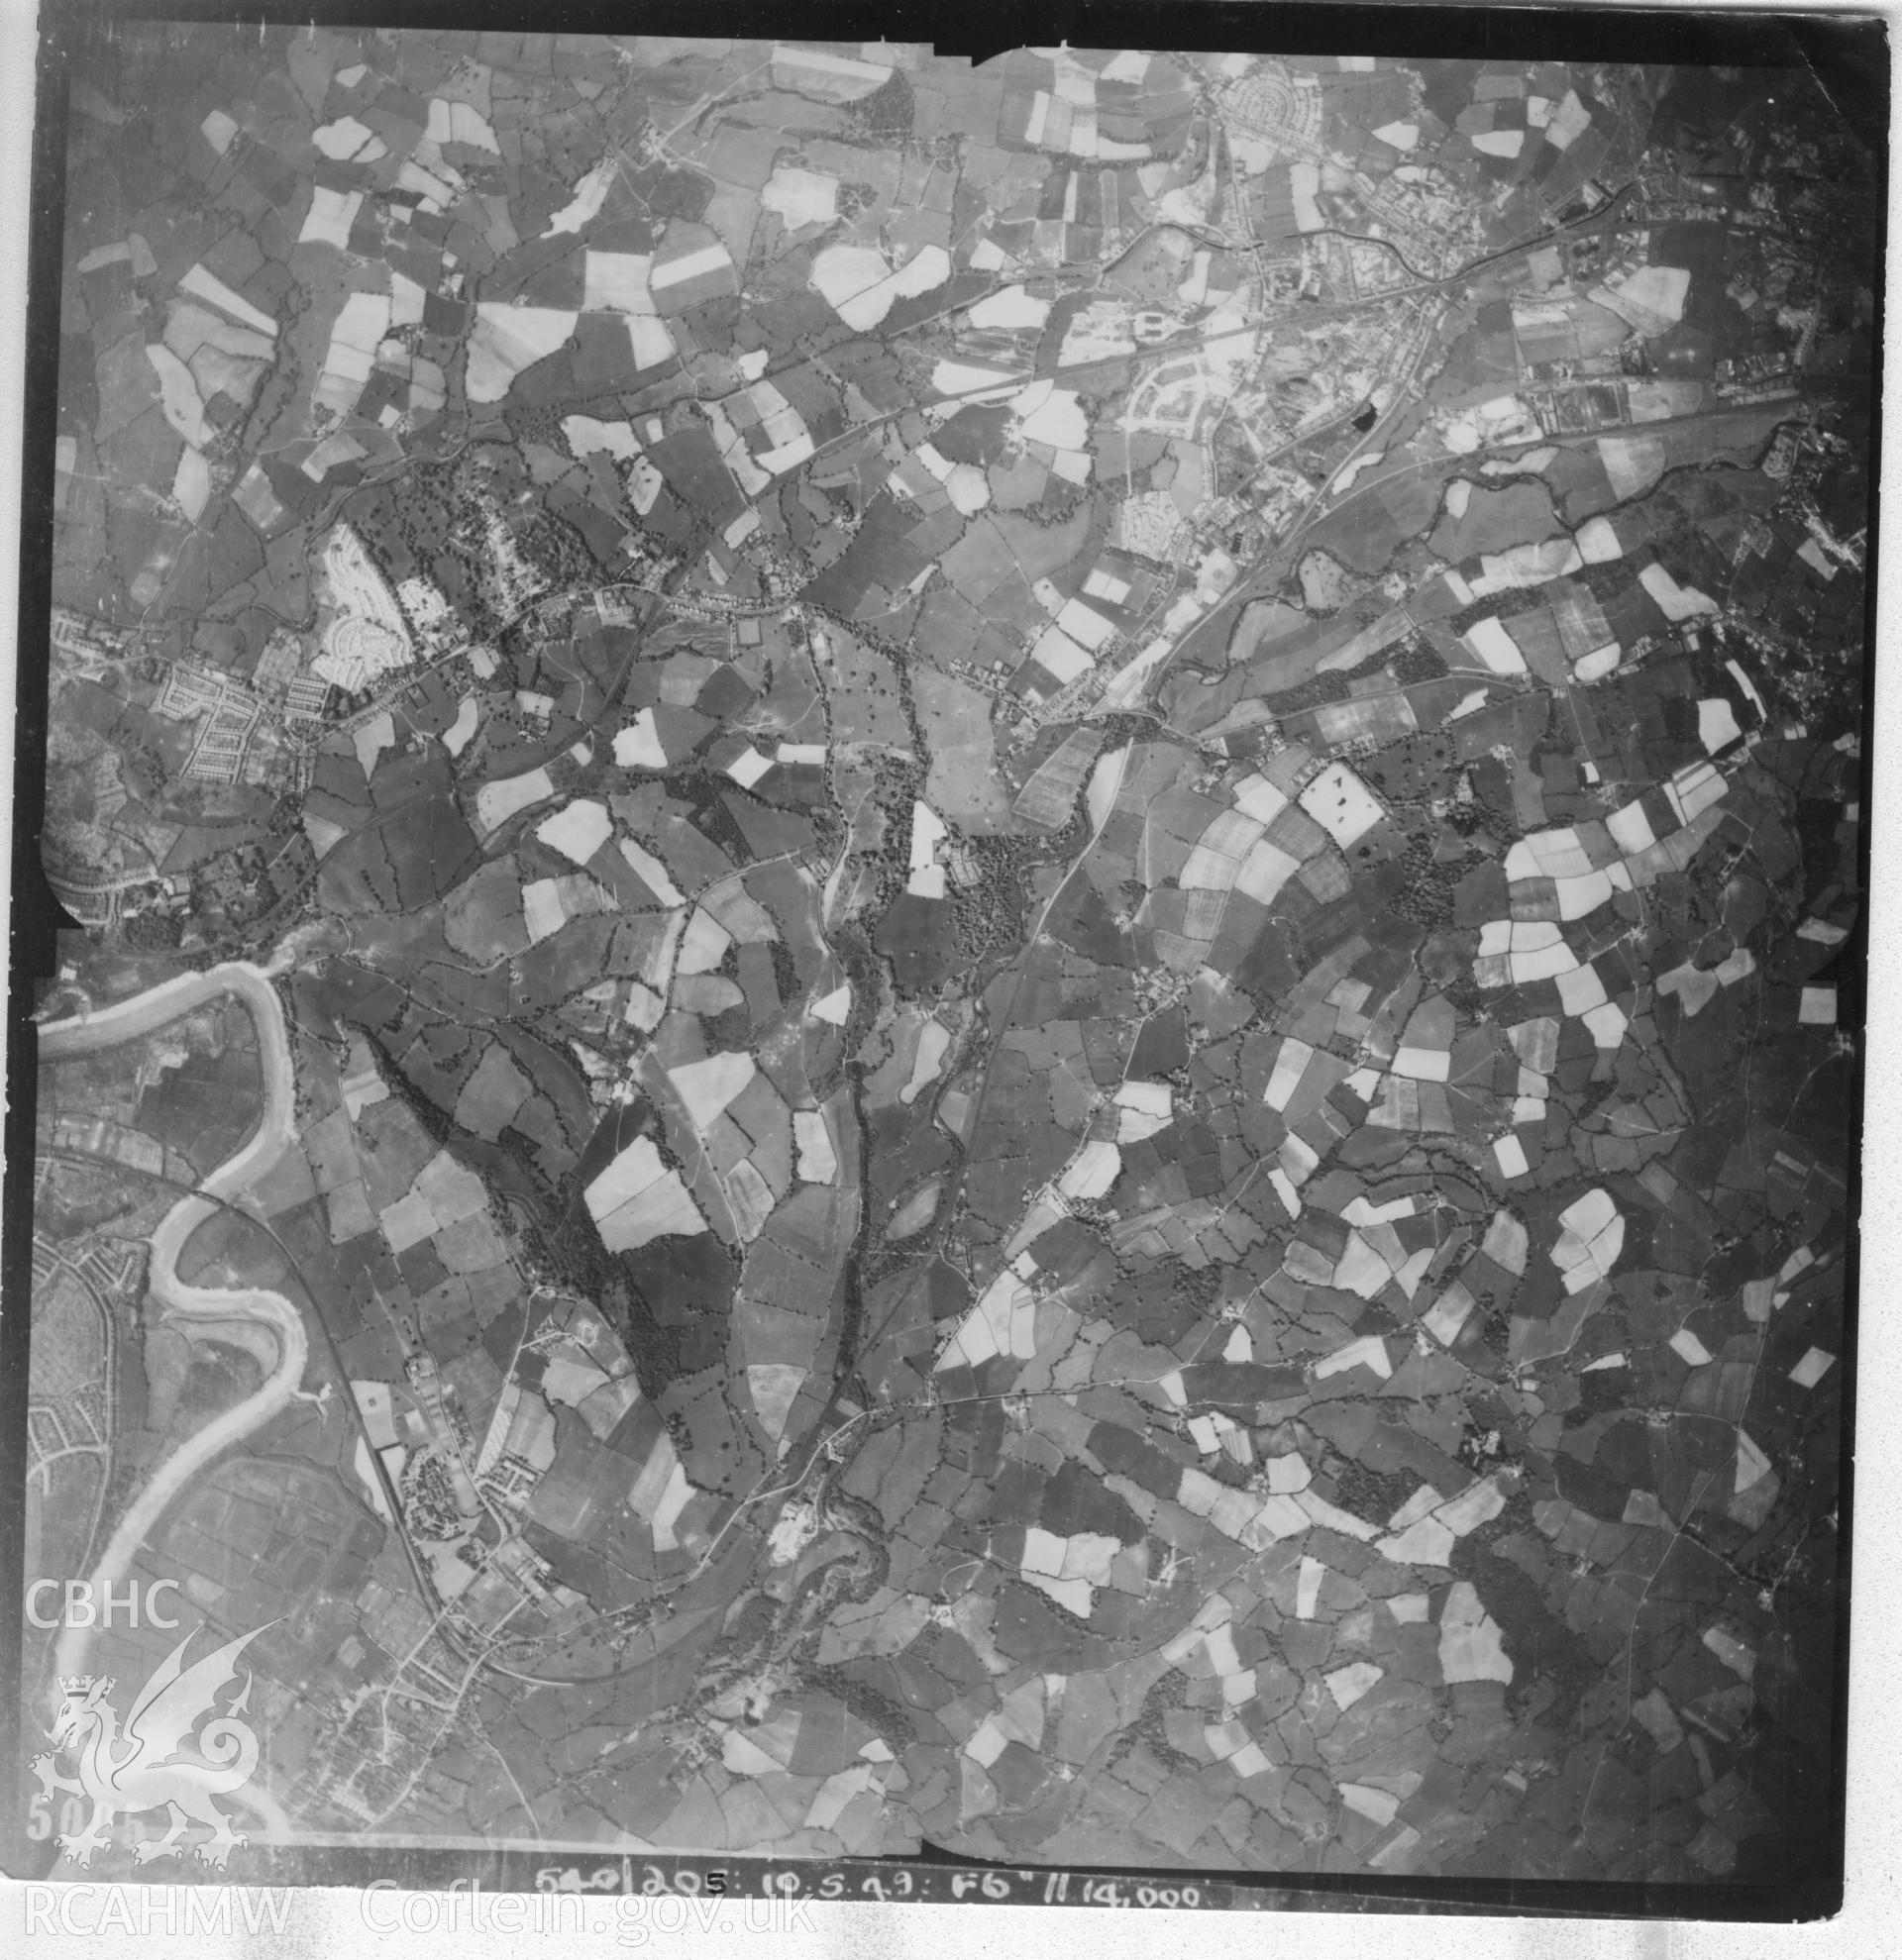 Aerial photograph of Cwmbran, taken on 10th May 1949. Included as part of Archaeology Wales' desk based assessment of former Llantarnam Community Primary School, Croeswen, Oakfield, Cwmbran, conducted in 2017.